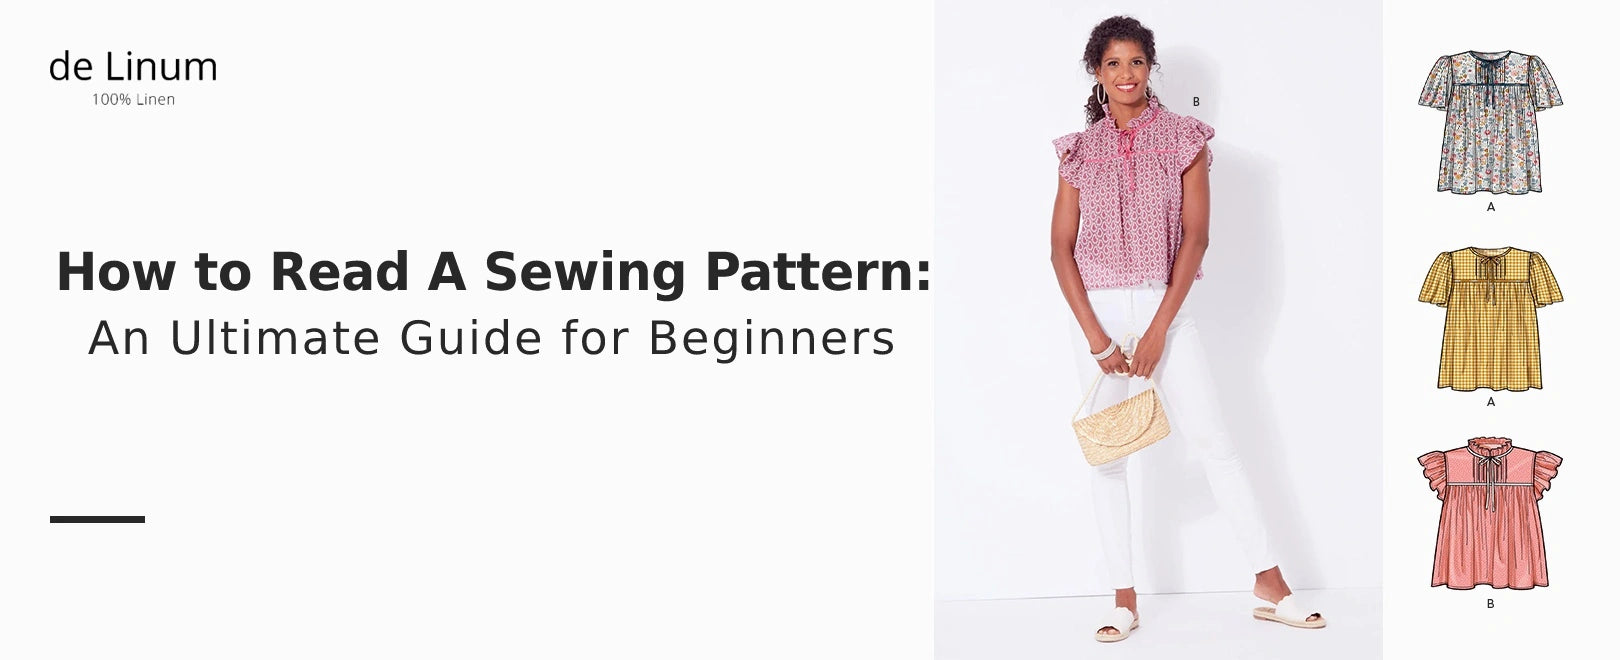 How to Read a Sewing Pattern : An Ultimate Guide for Beginners – de Linum